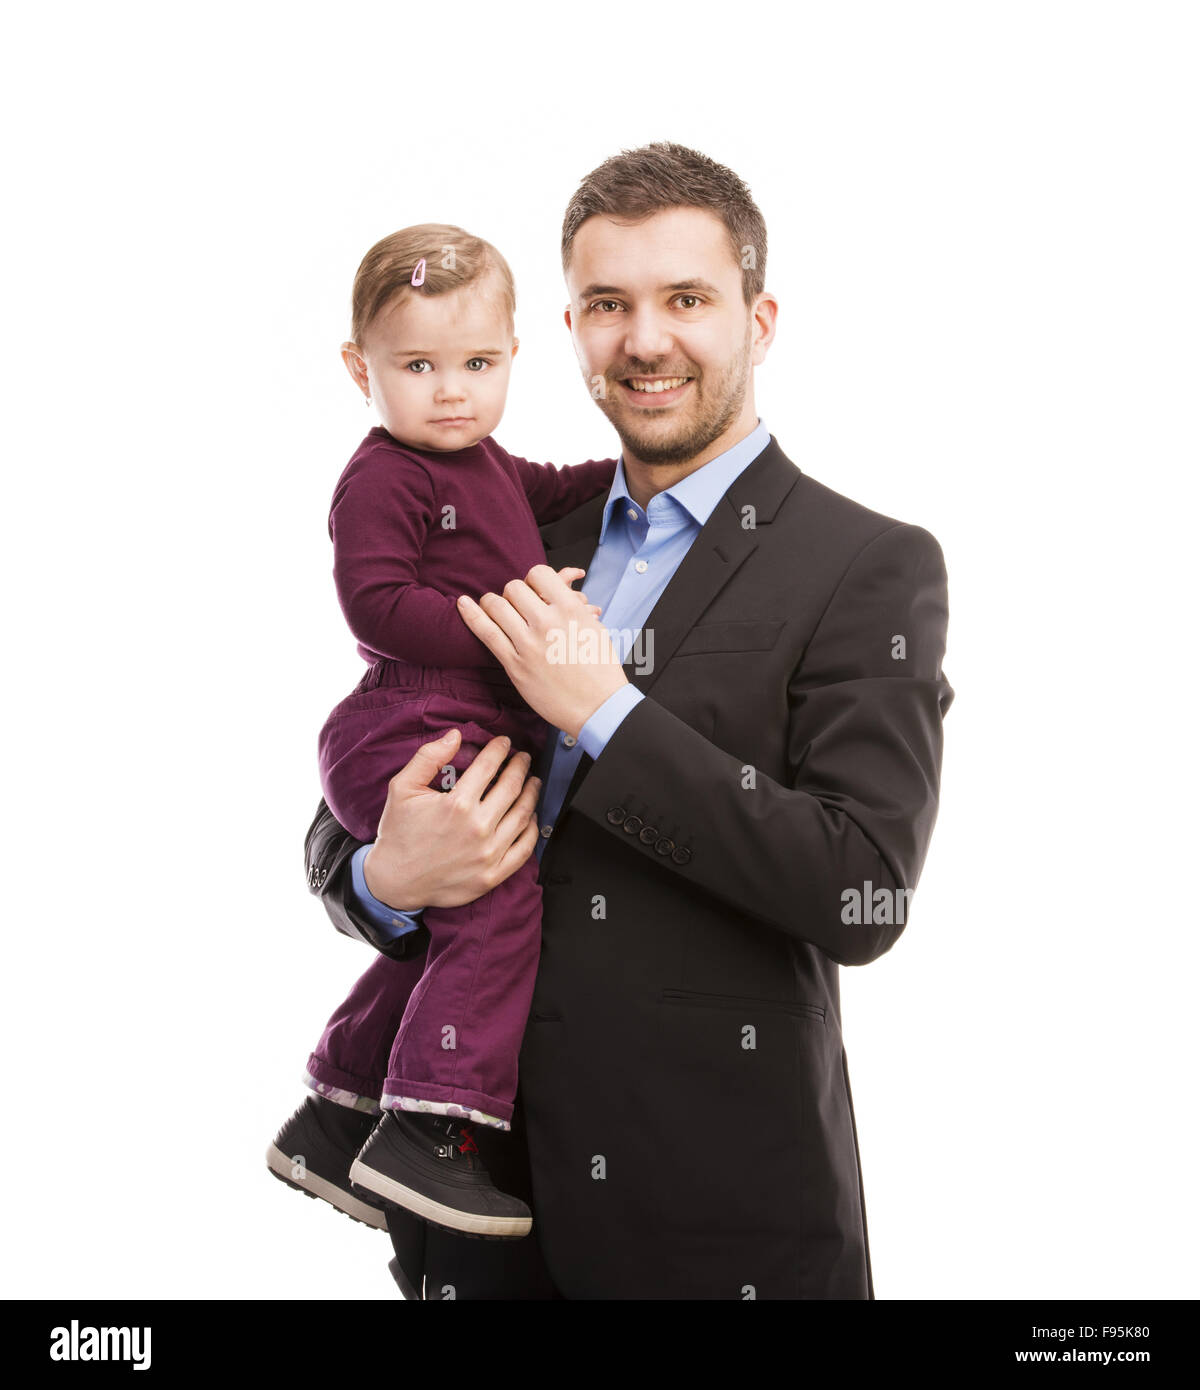 Father as manager with his baby isolated over white background. Stock Photo